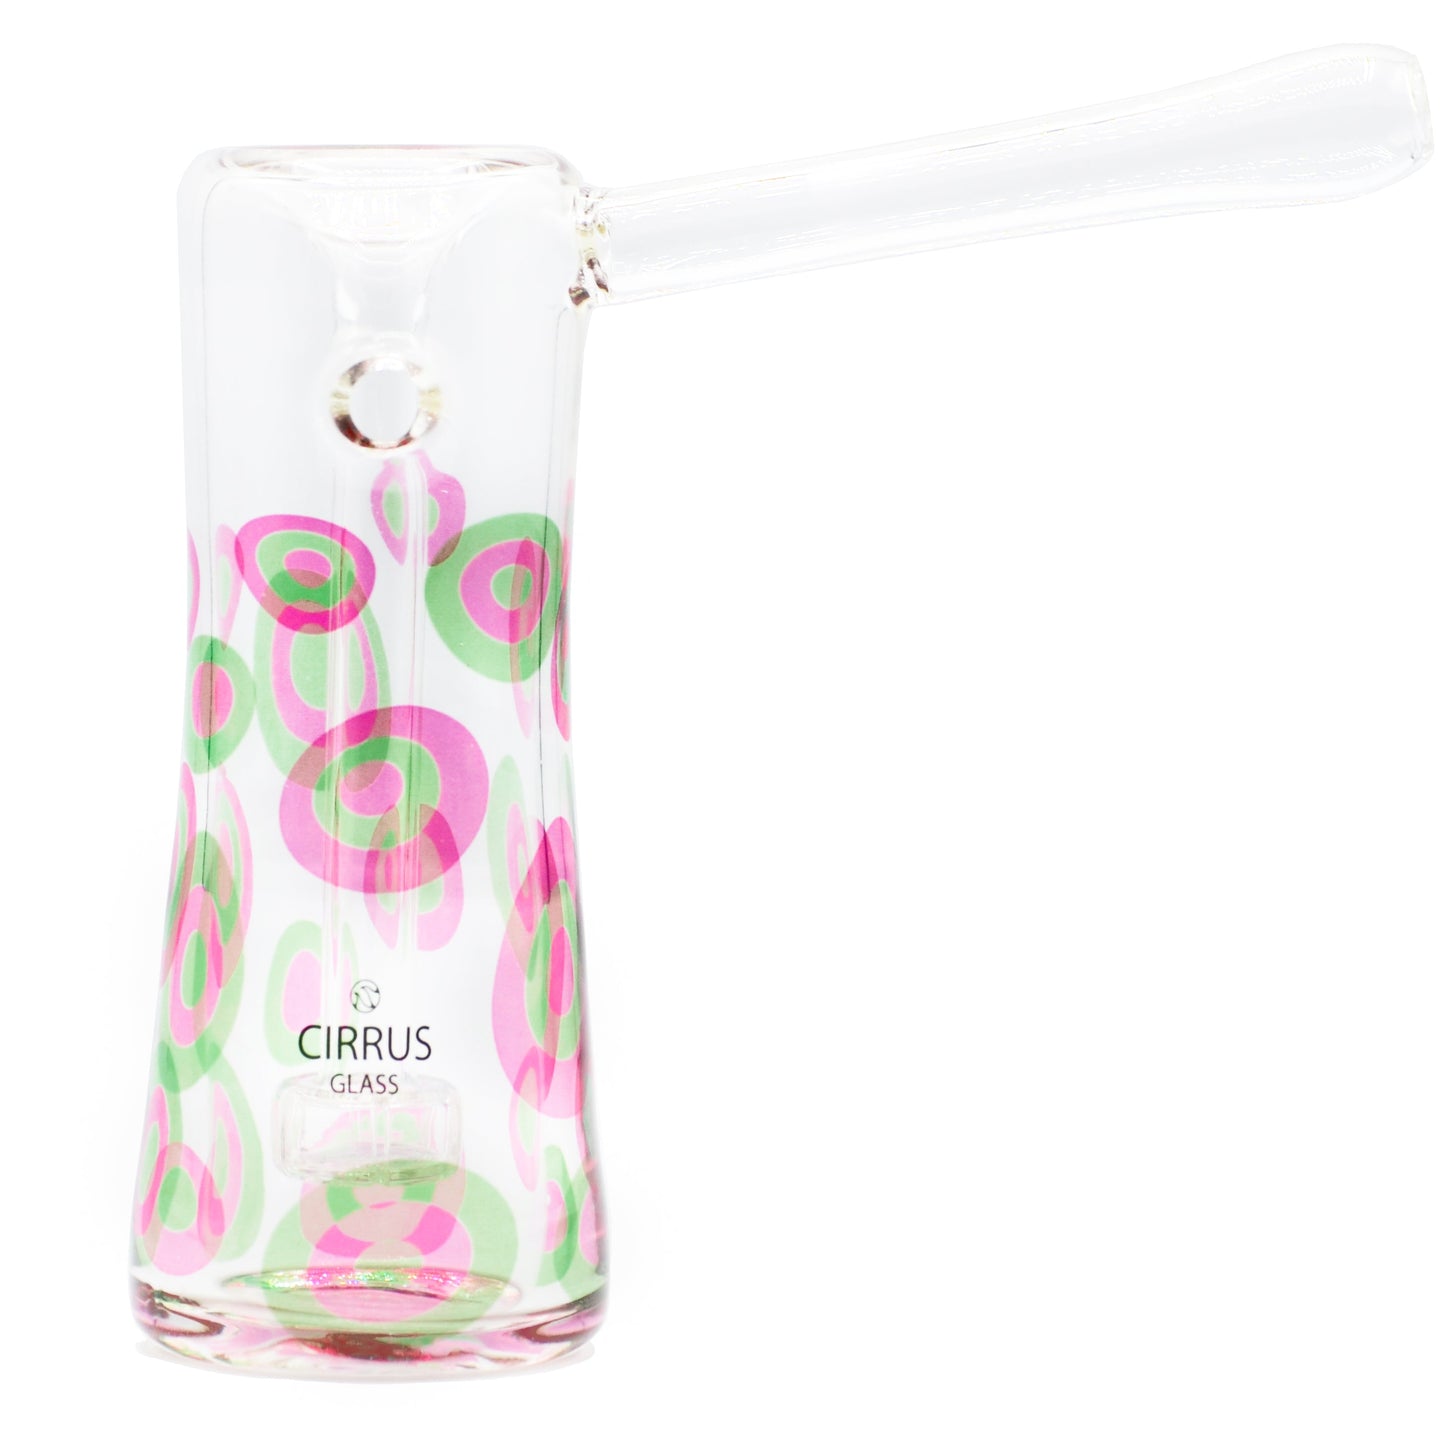 Cirrus Glass Bubbler by Cirrus Glass | Mission Dispensary